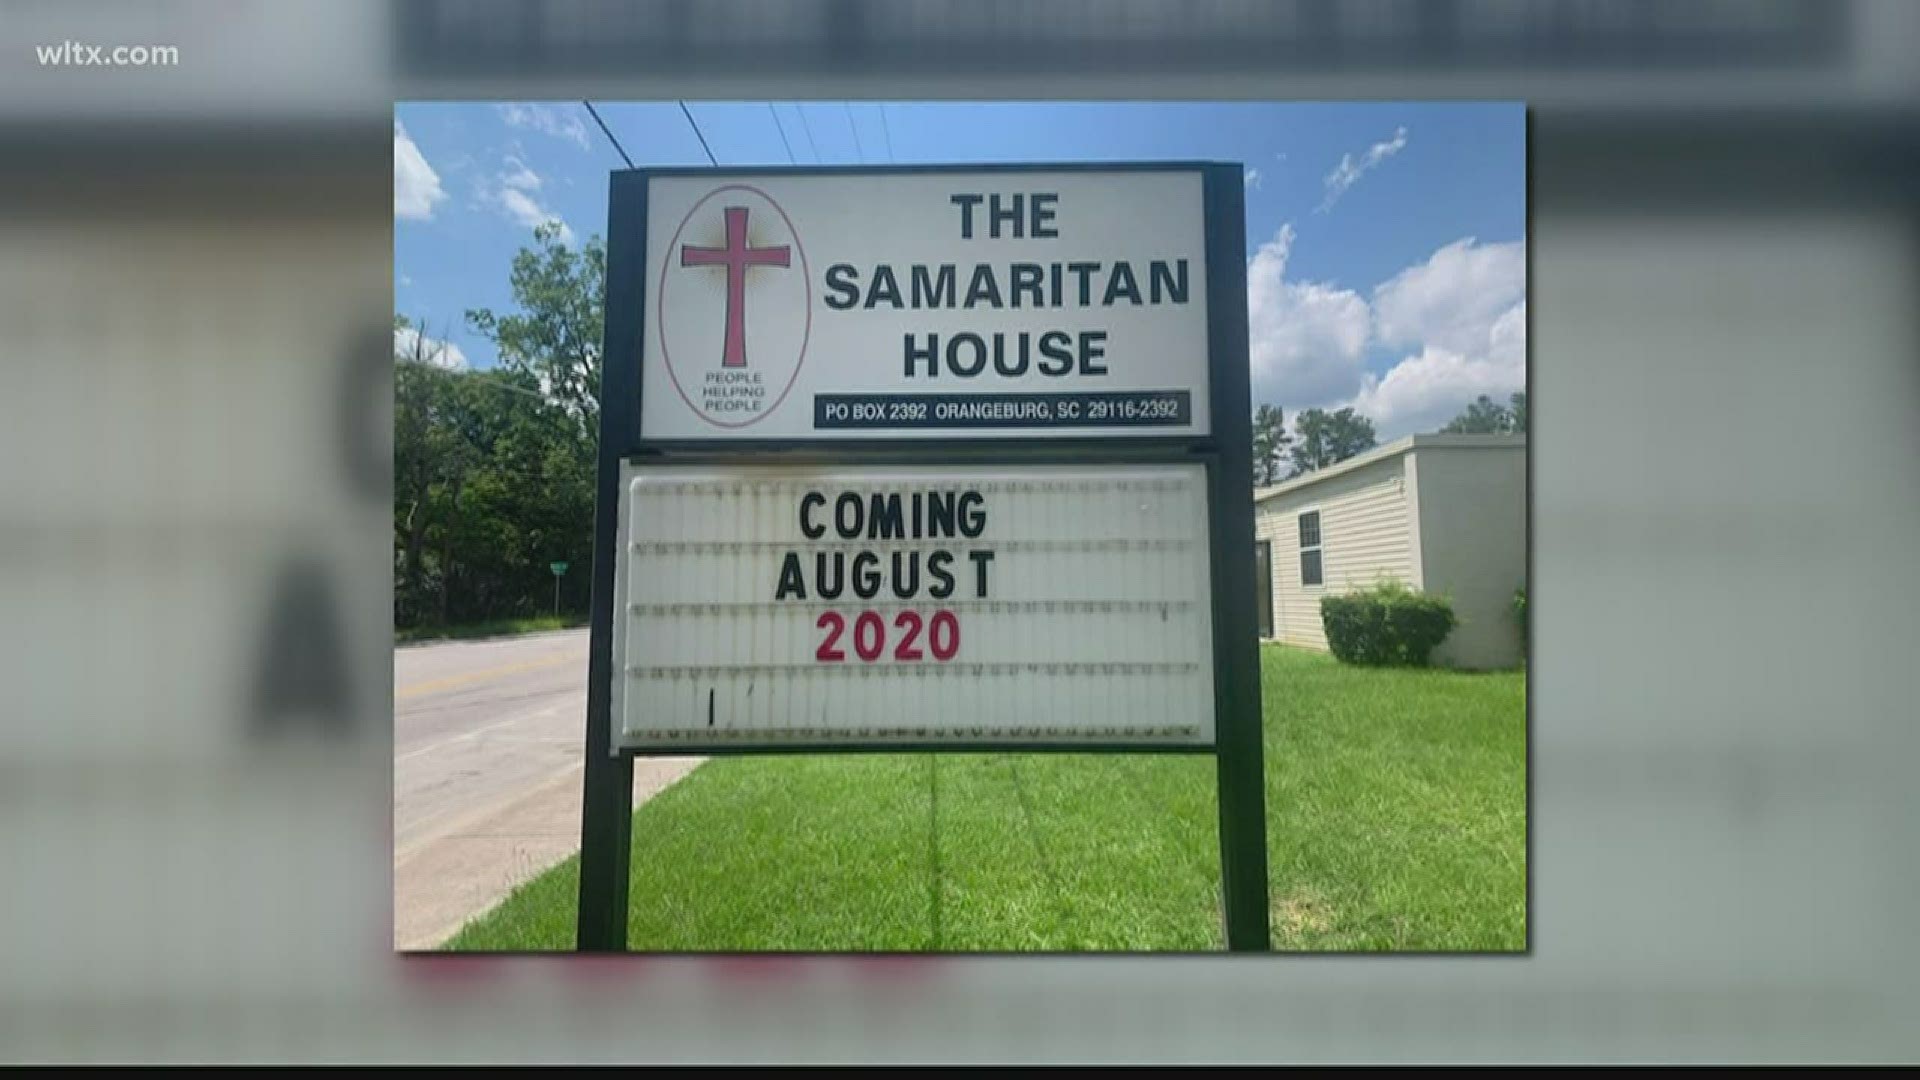 There's been an effort for some time to get the Samaritan House back open.